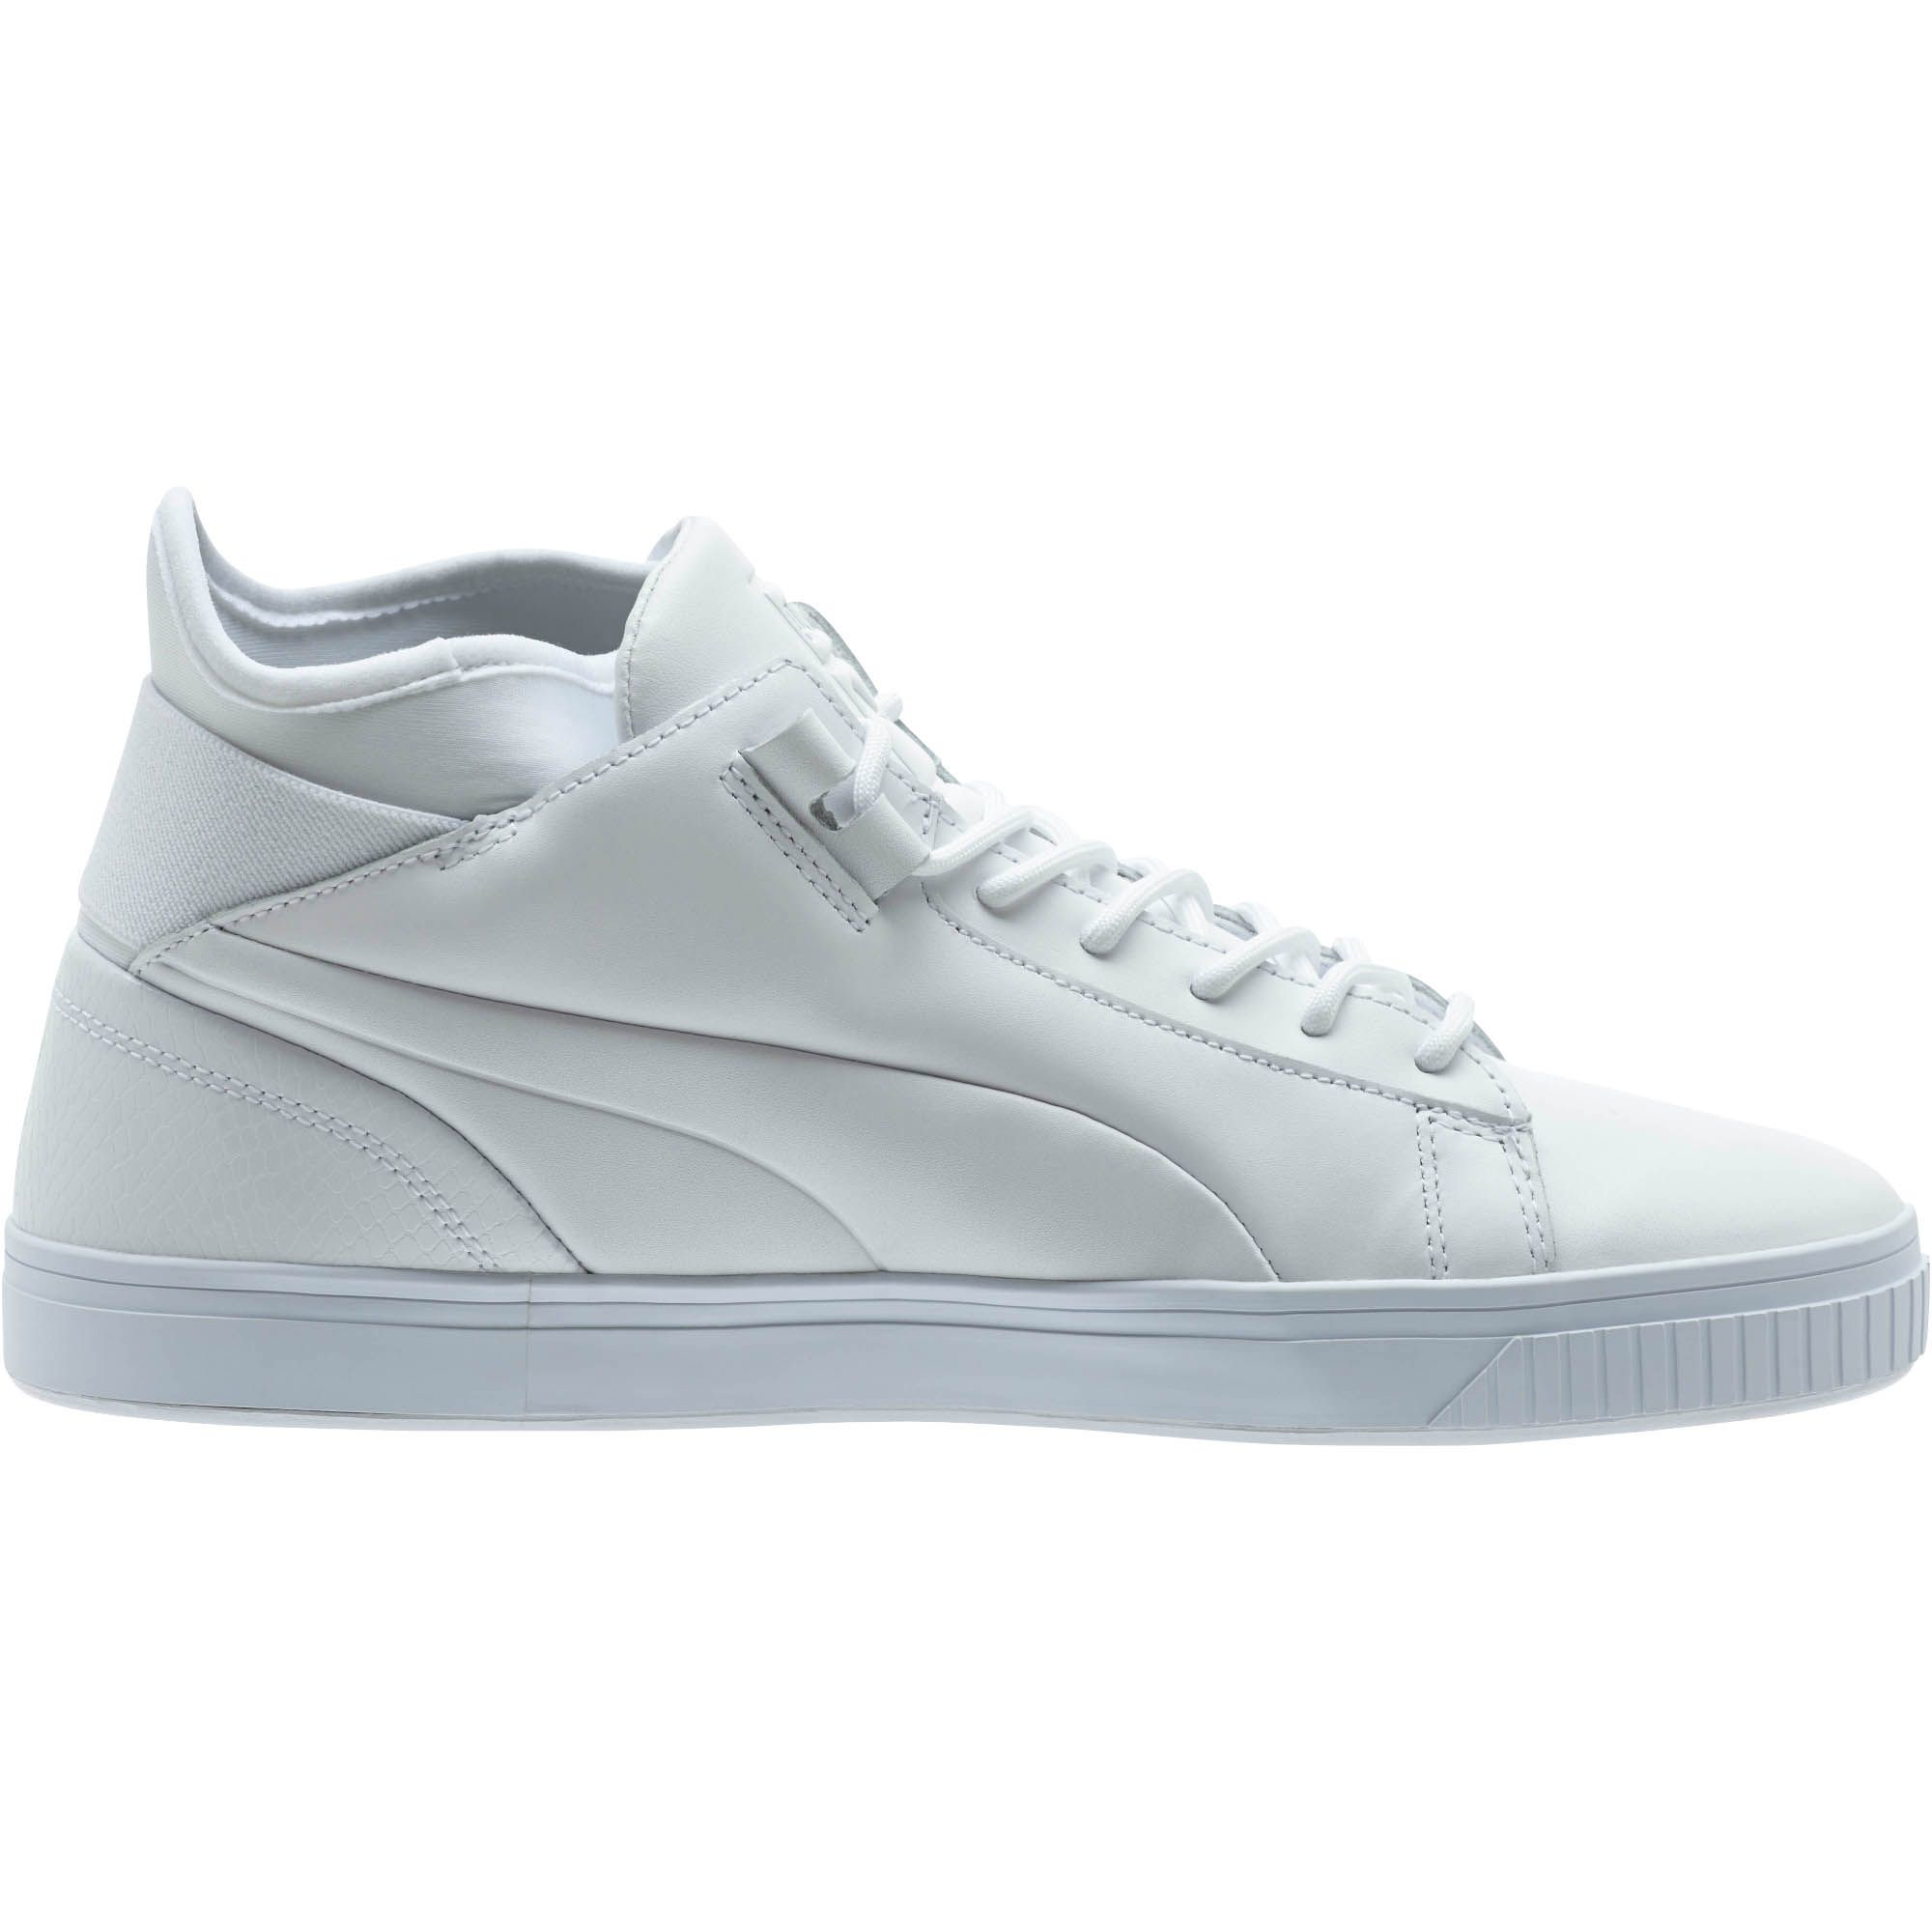 PUMA Leather Play Prm Men's Sneakers 